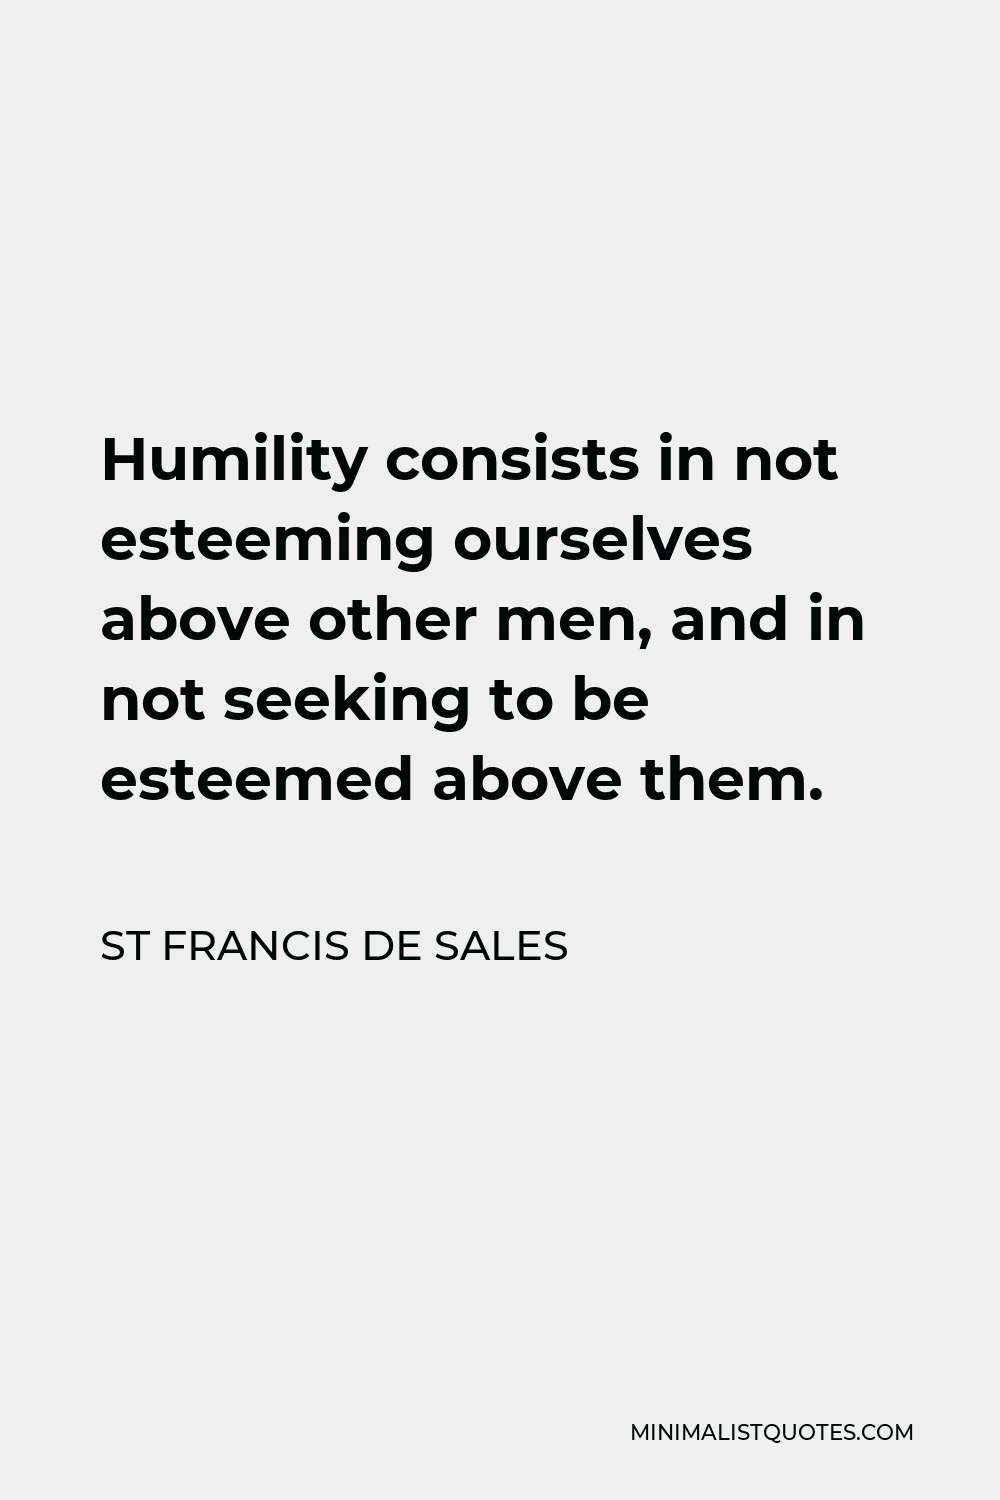 St Francis De Sales Quote - Humility consists in not esteeming ourselves above other men, and in not seeking to be esteemed above them.